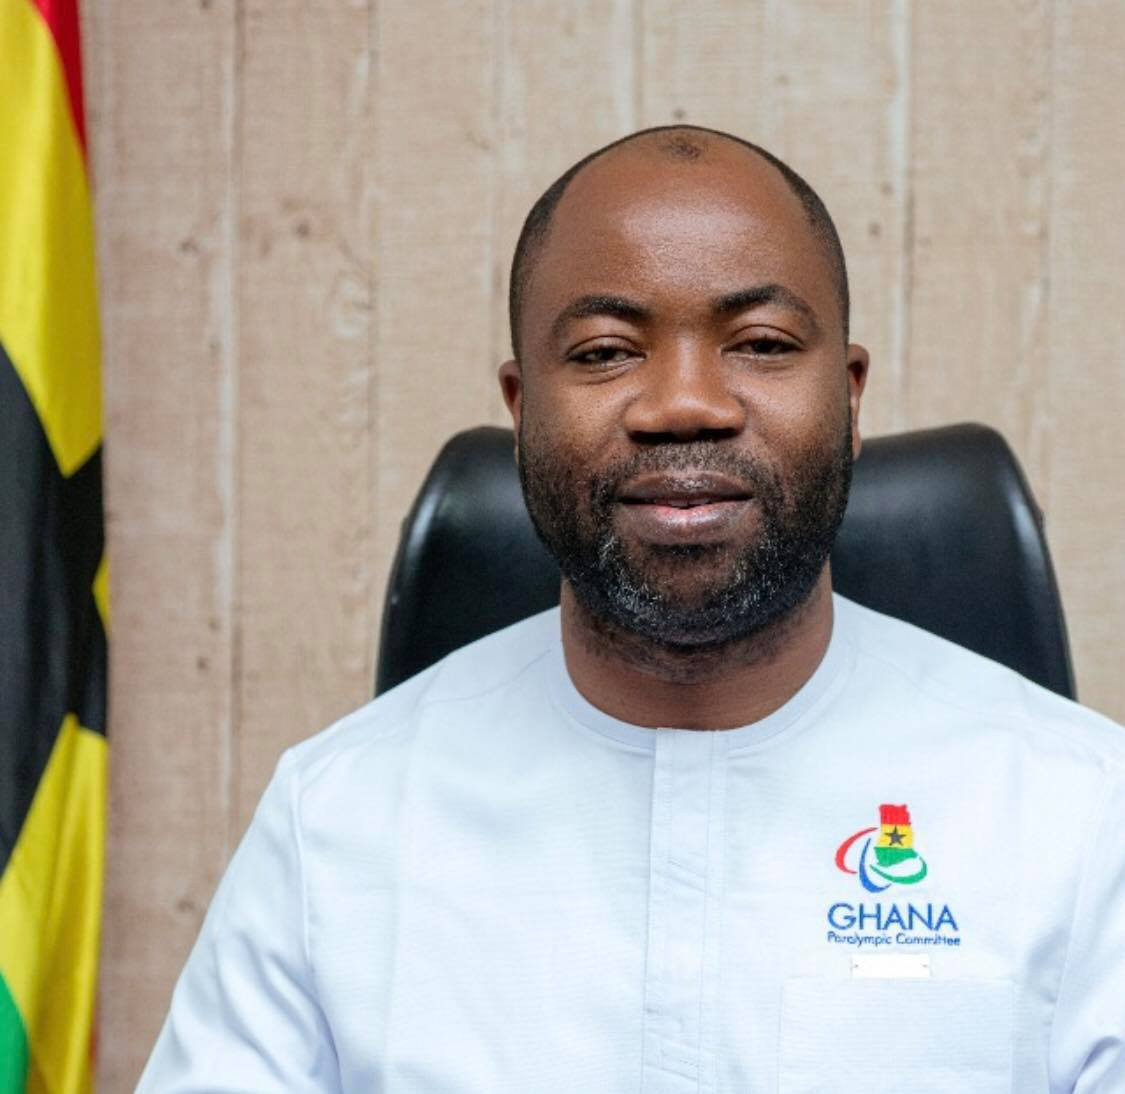 Ghana's Samson Deen elected President of African Paralympic Committee